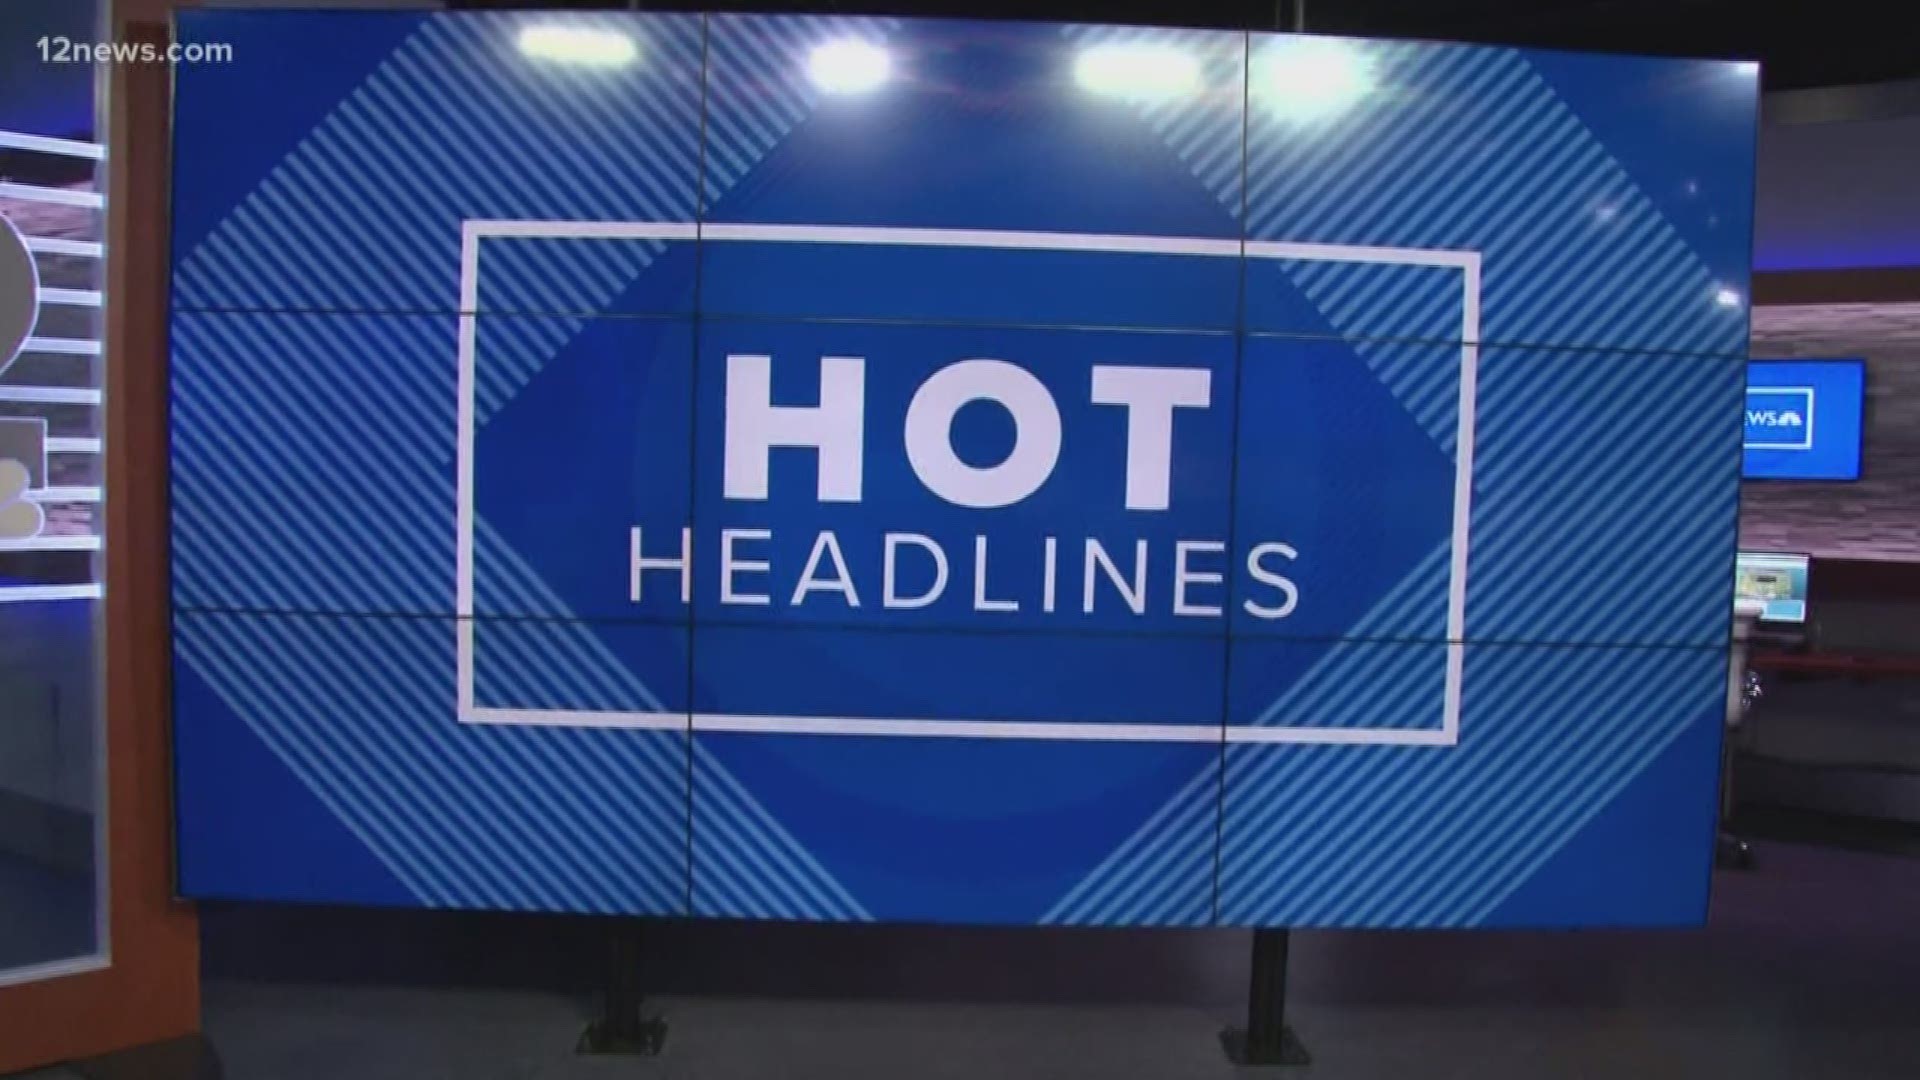 Here are a few trending headlines for the afternoon of June 14, 2019.